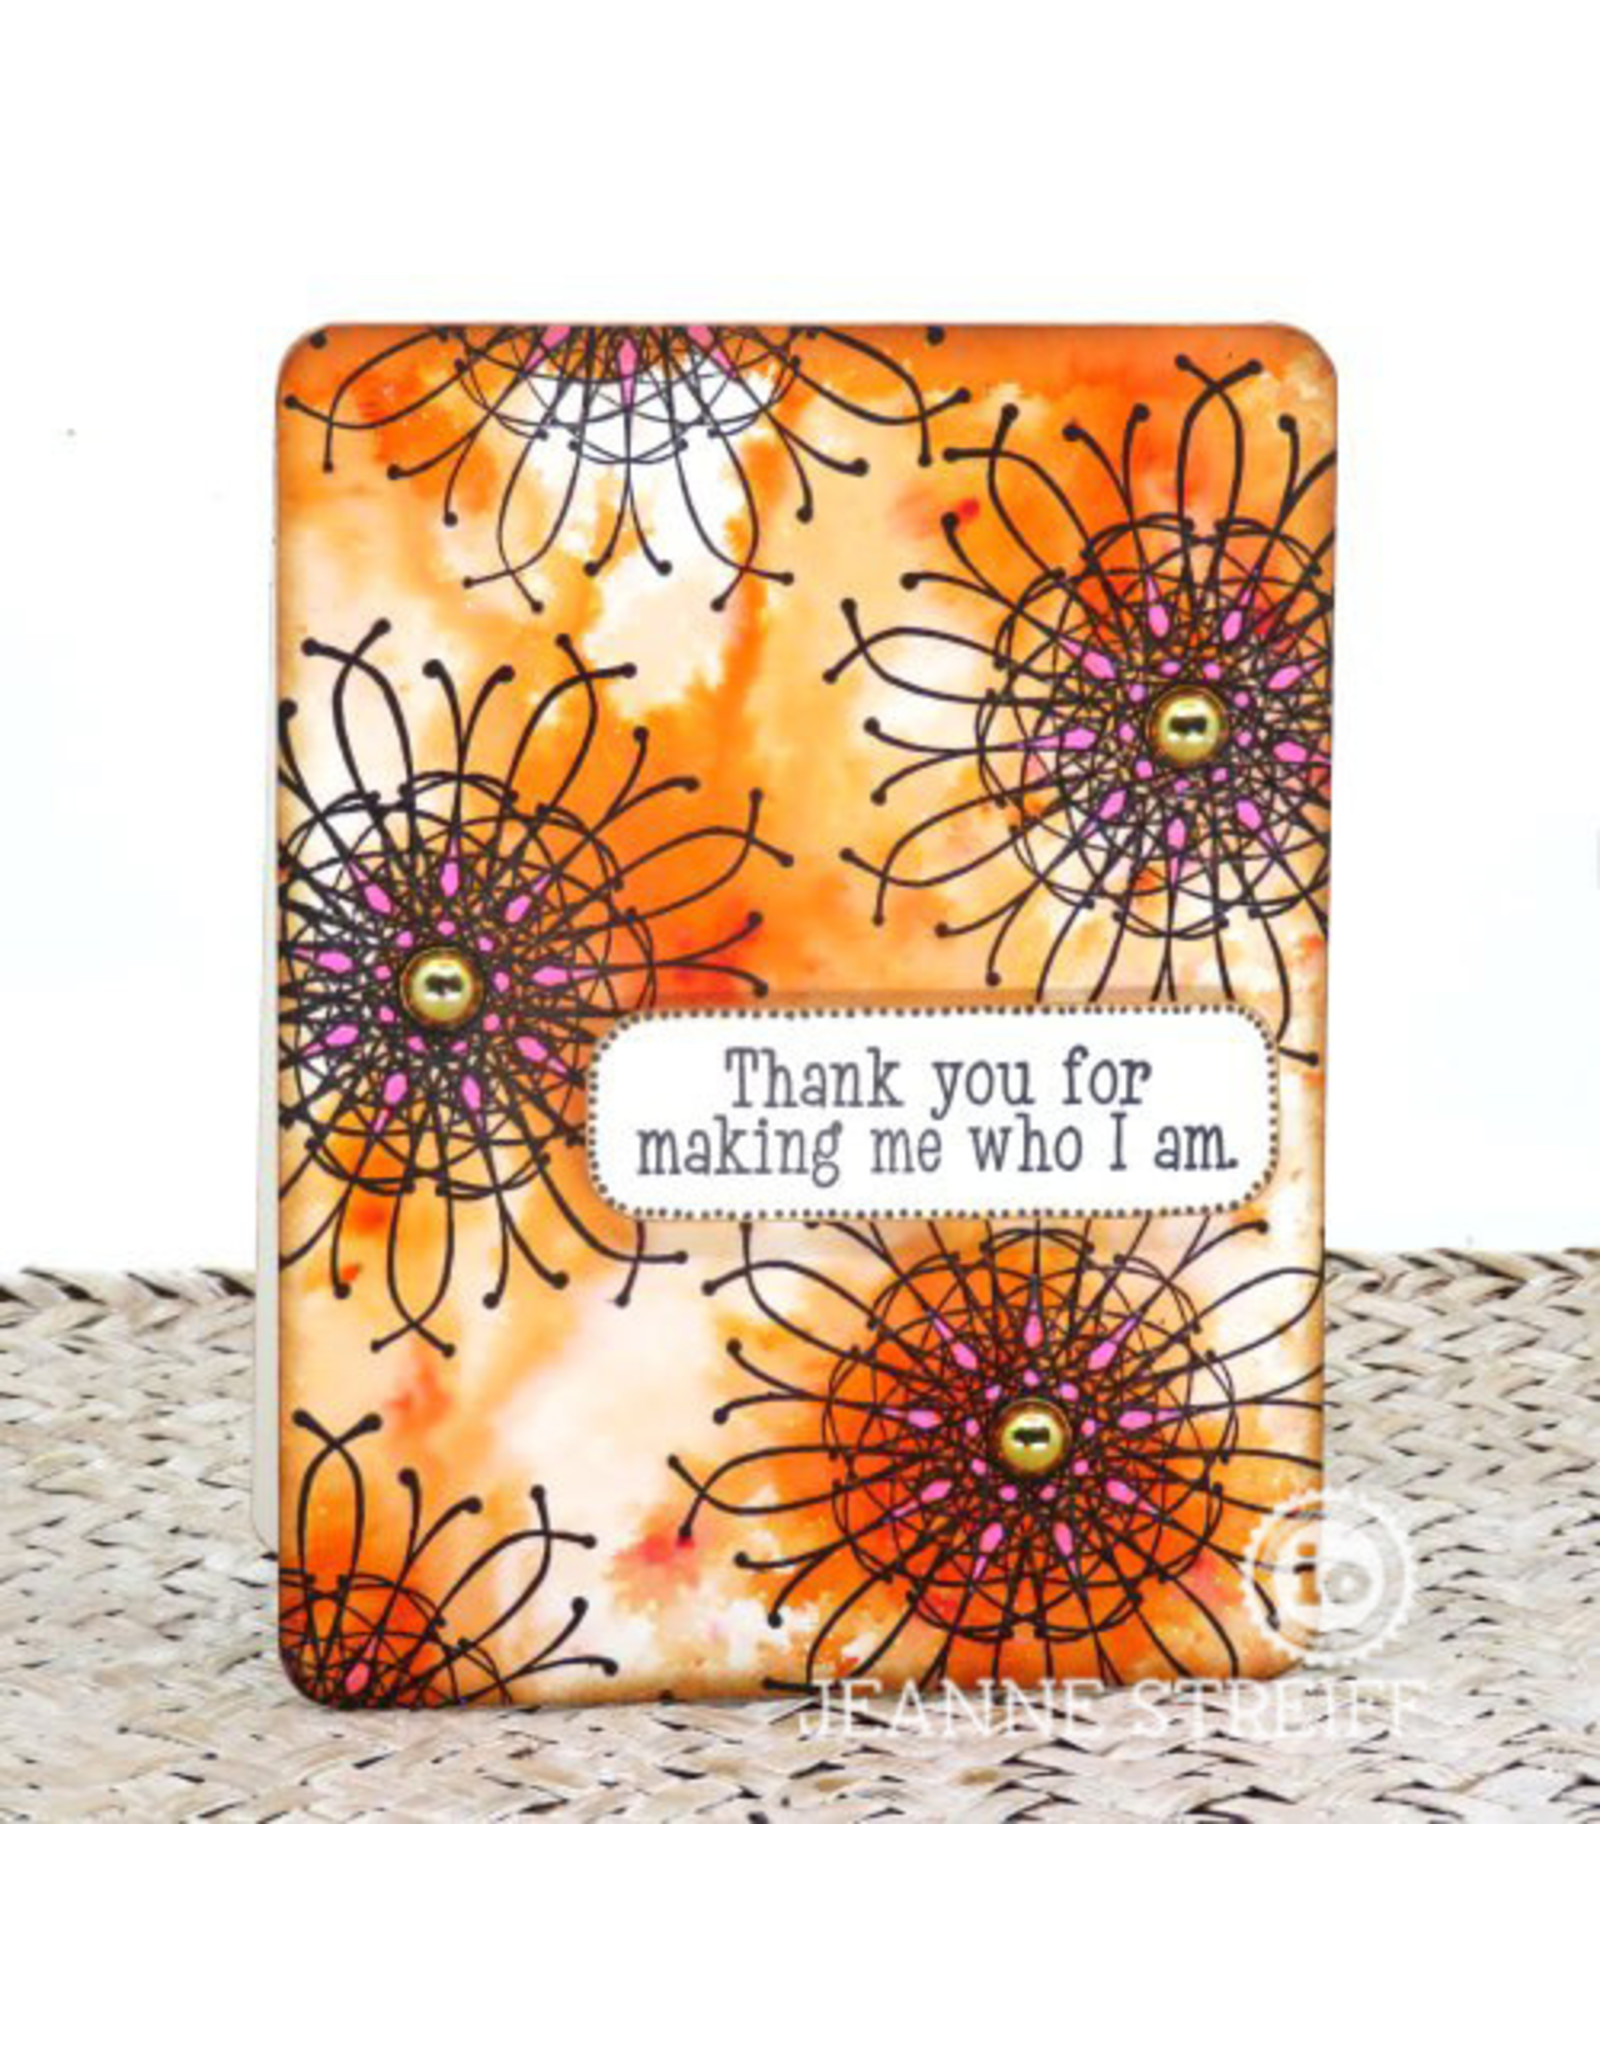 Impression Obsession Mother's Day Sayings Stamps